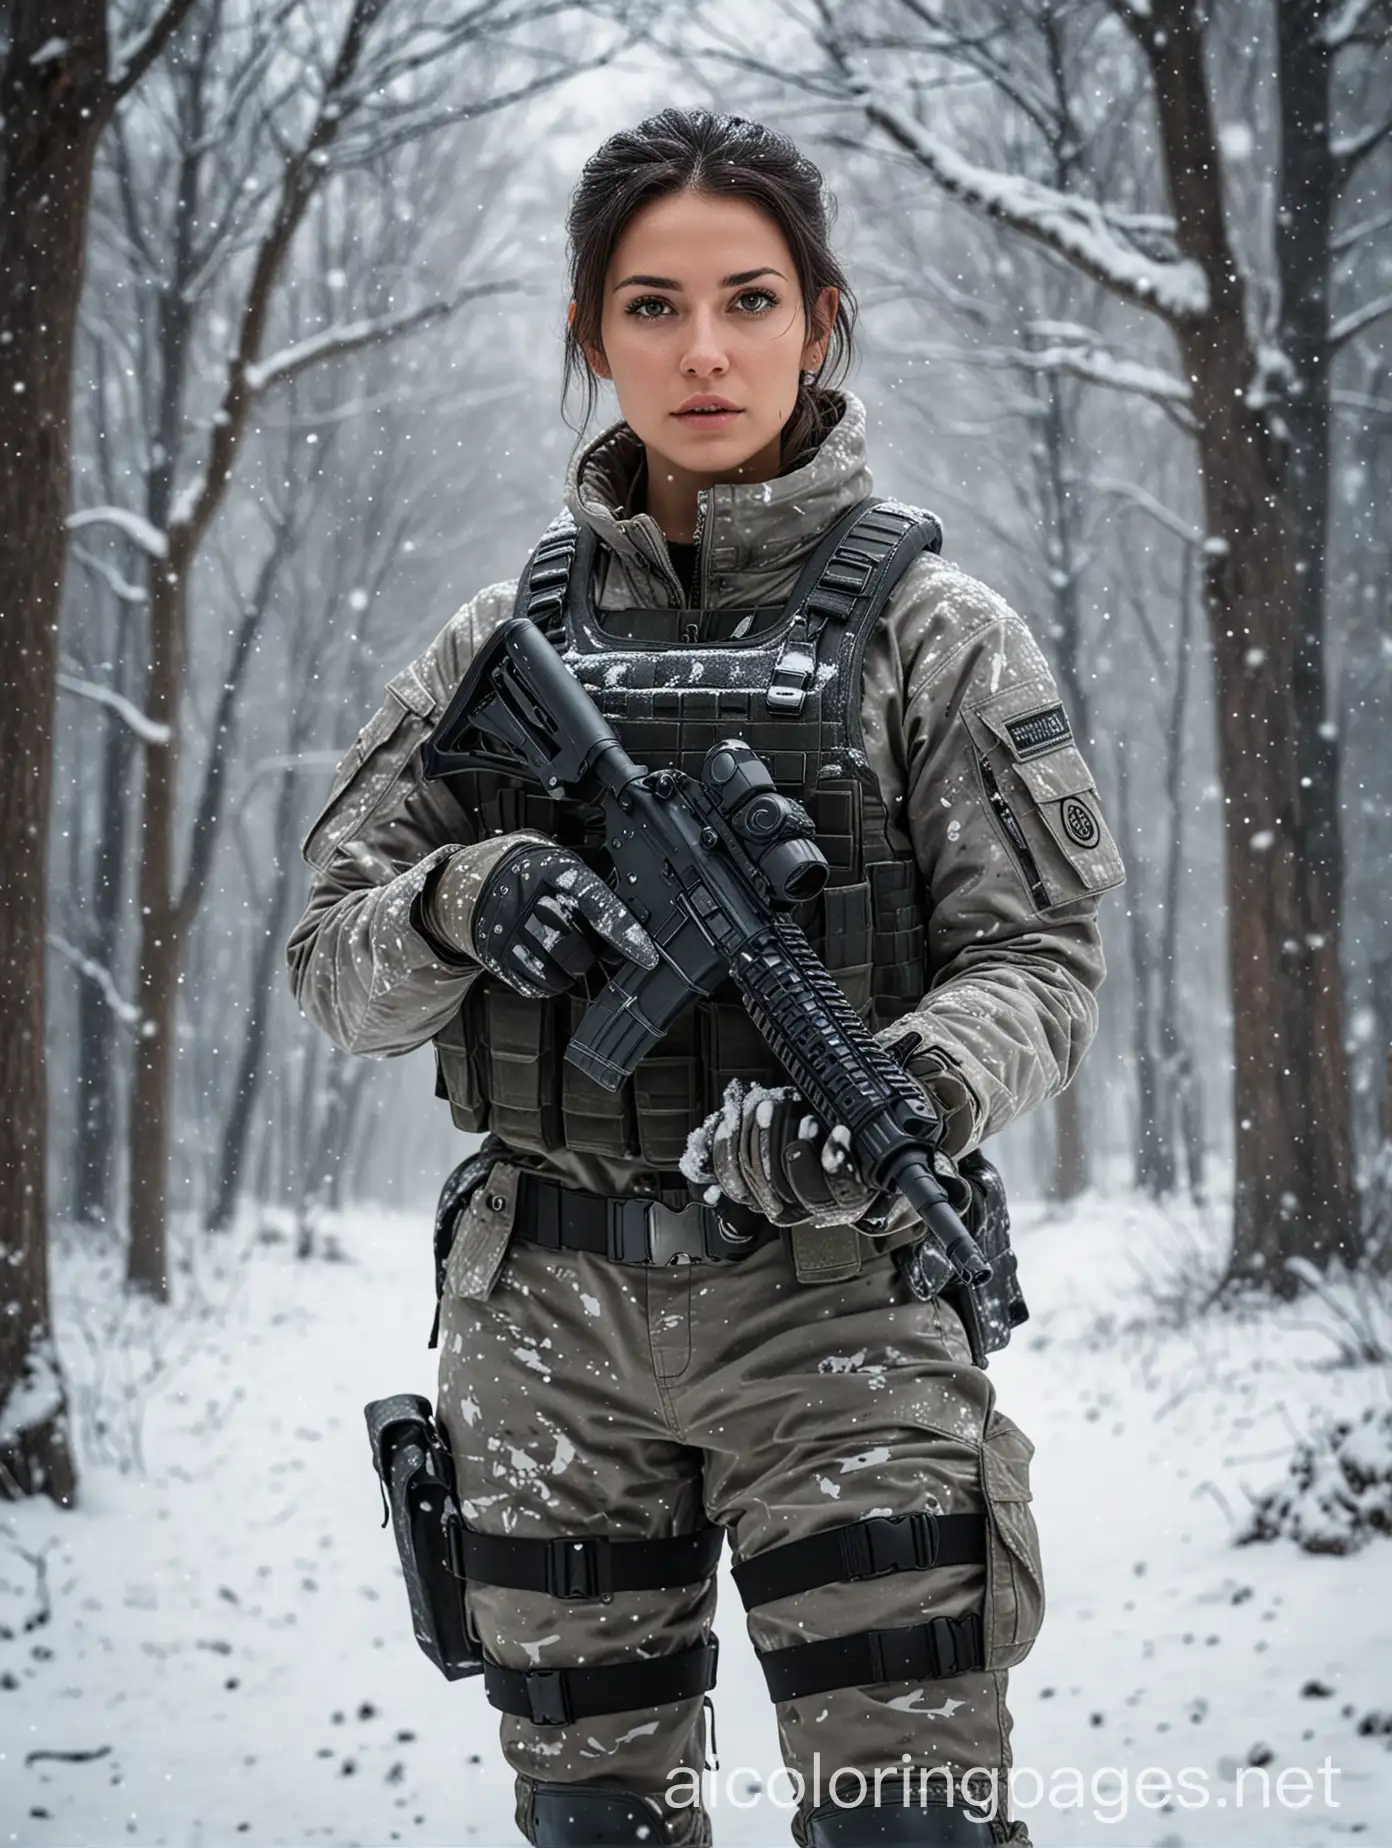 Winter-Camo-Soldier-Girl-with-AR15-in-Snowstorm